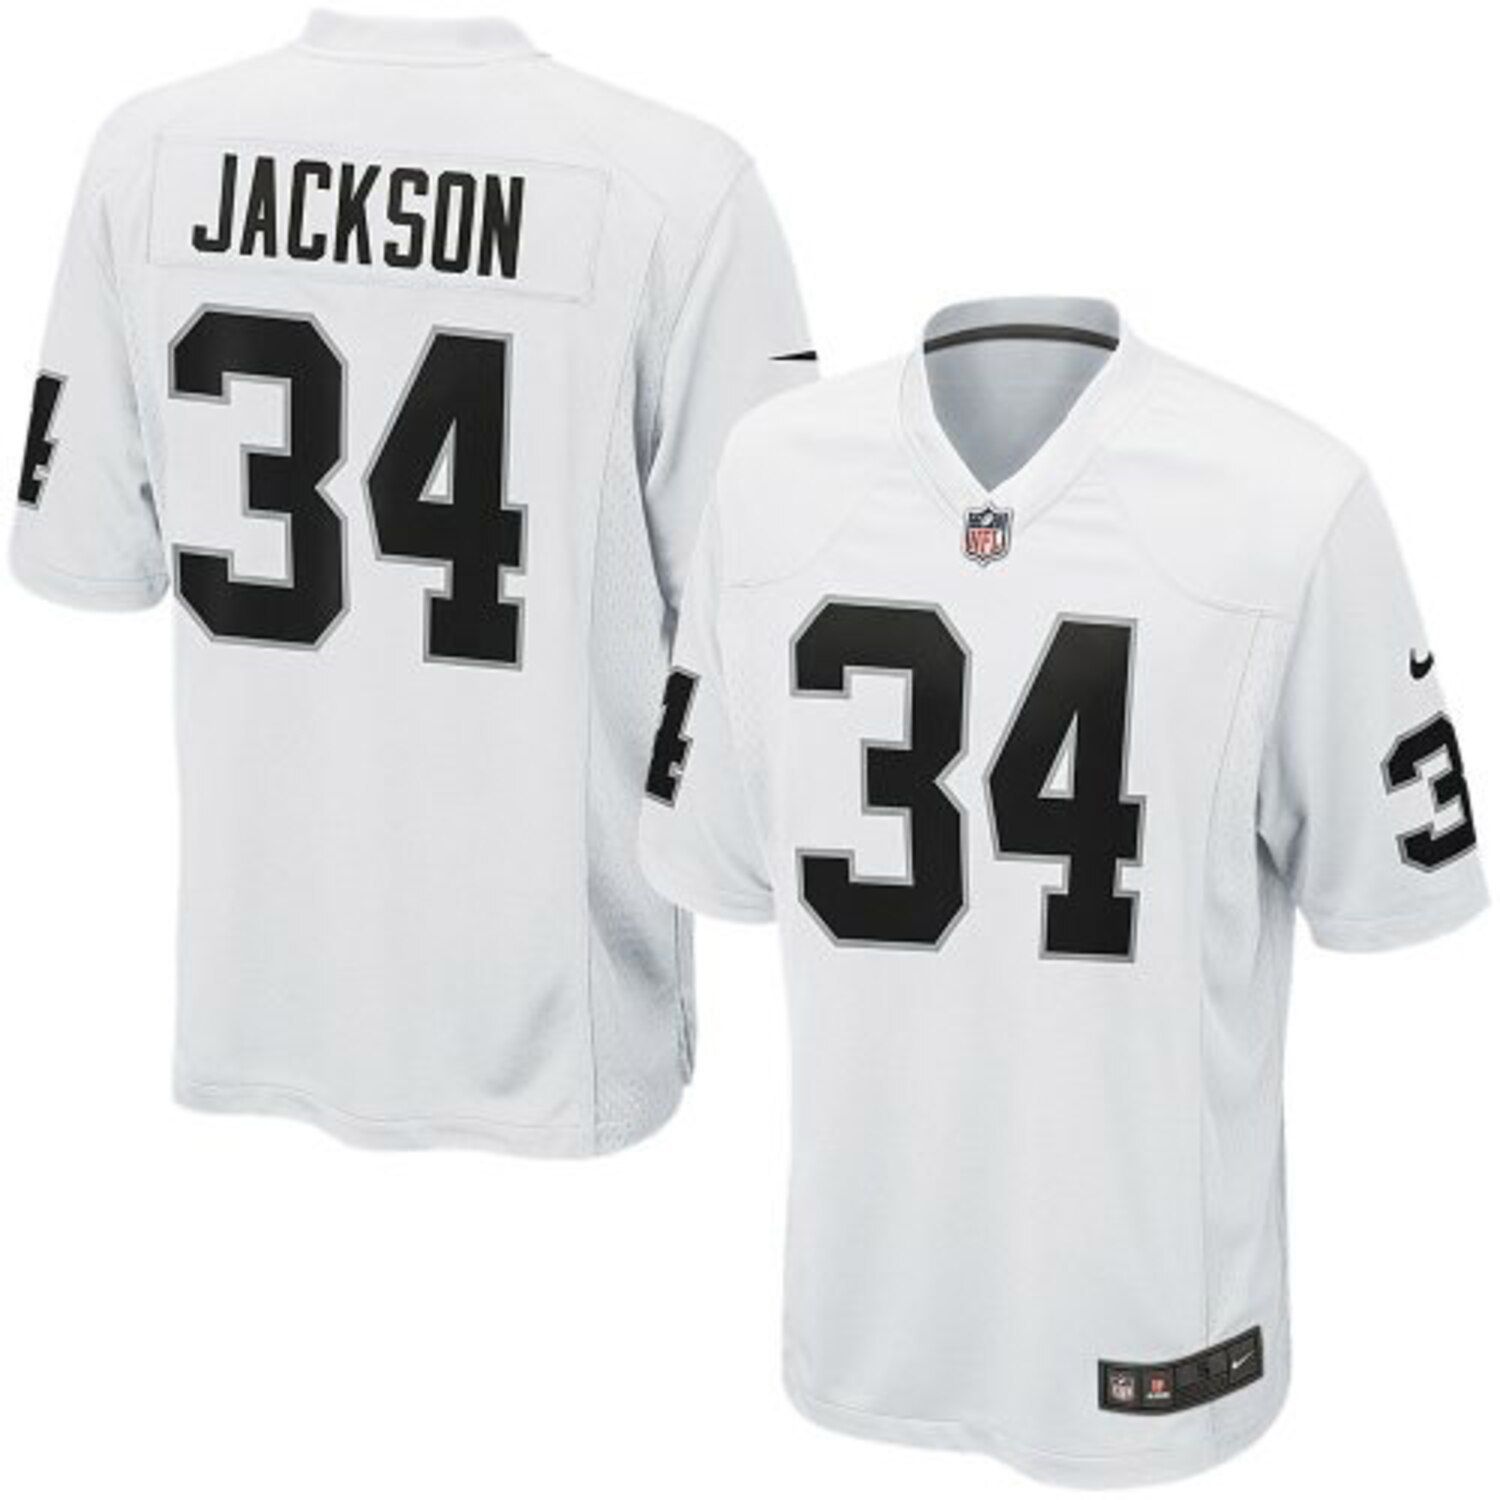 oakland raiders game jersey